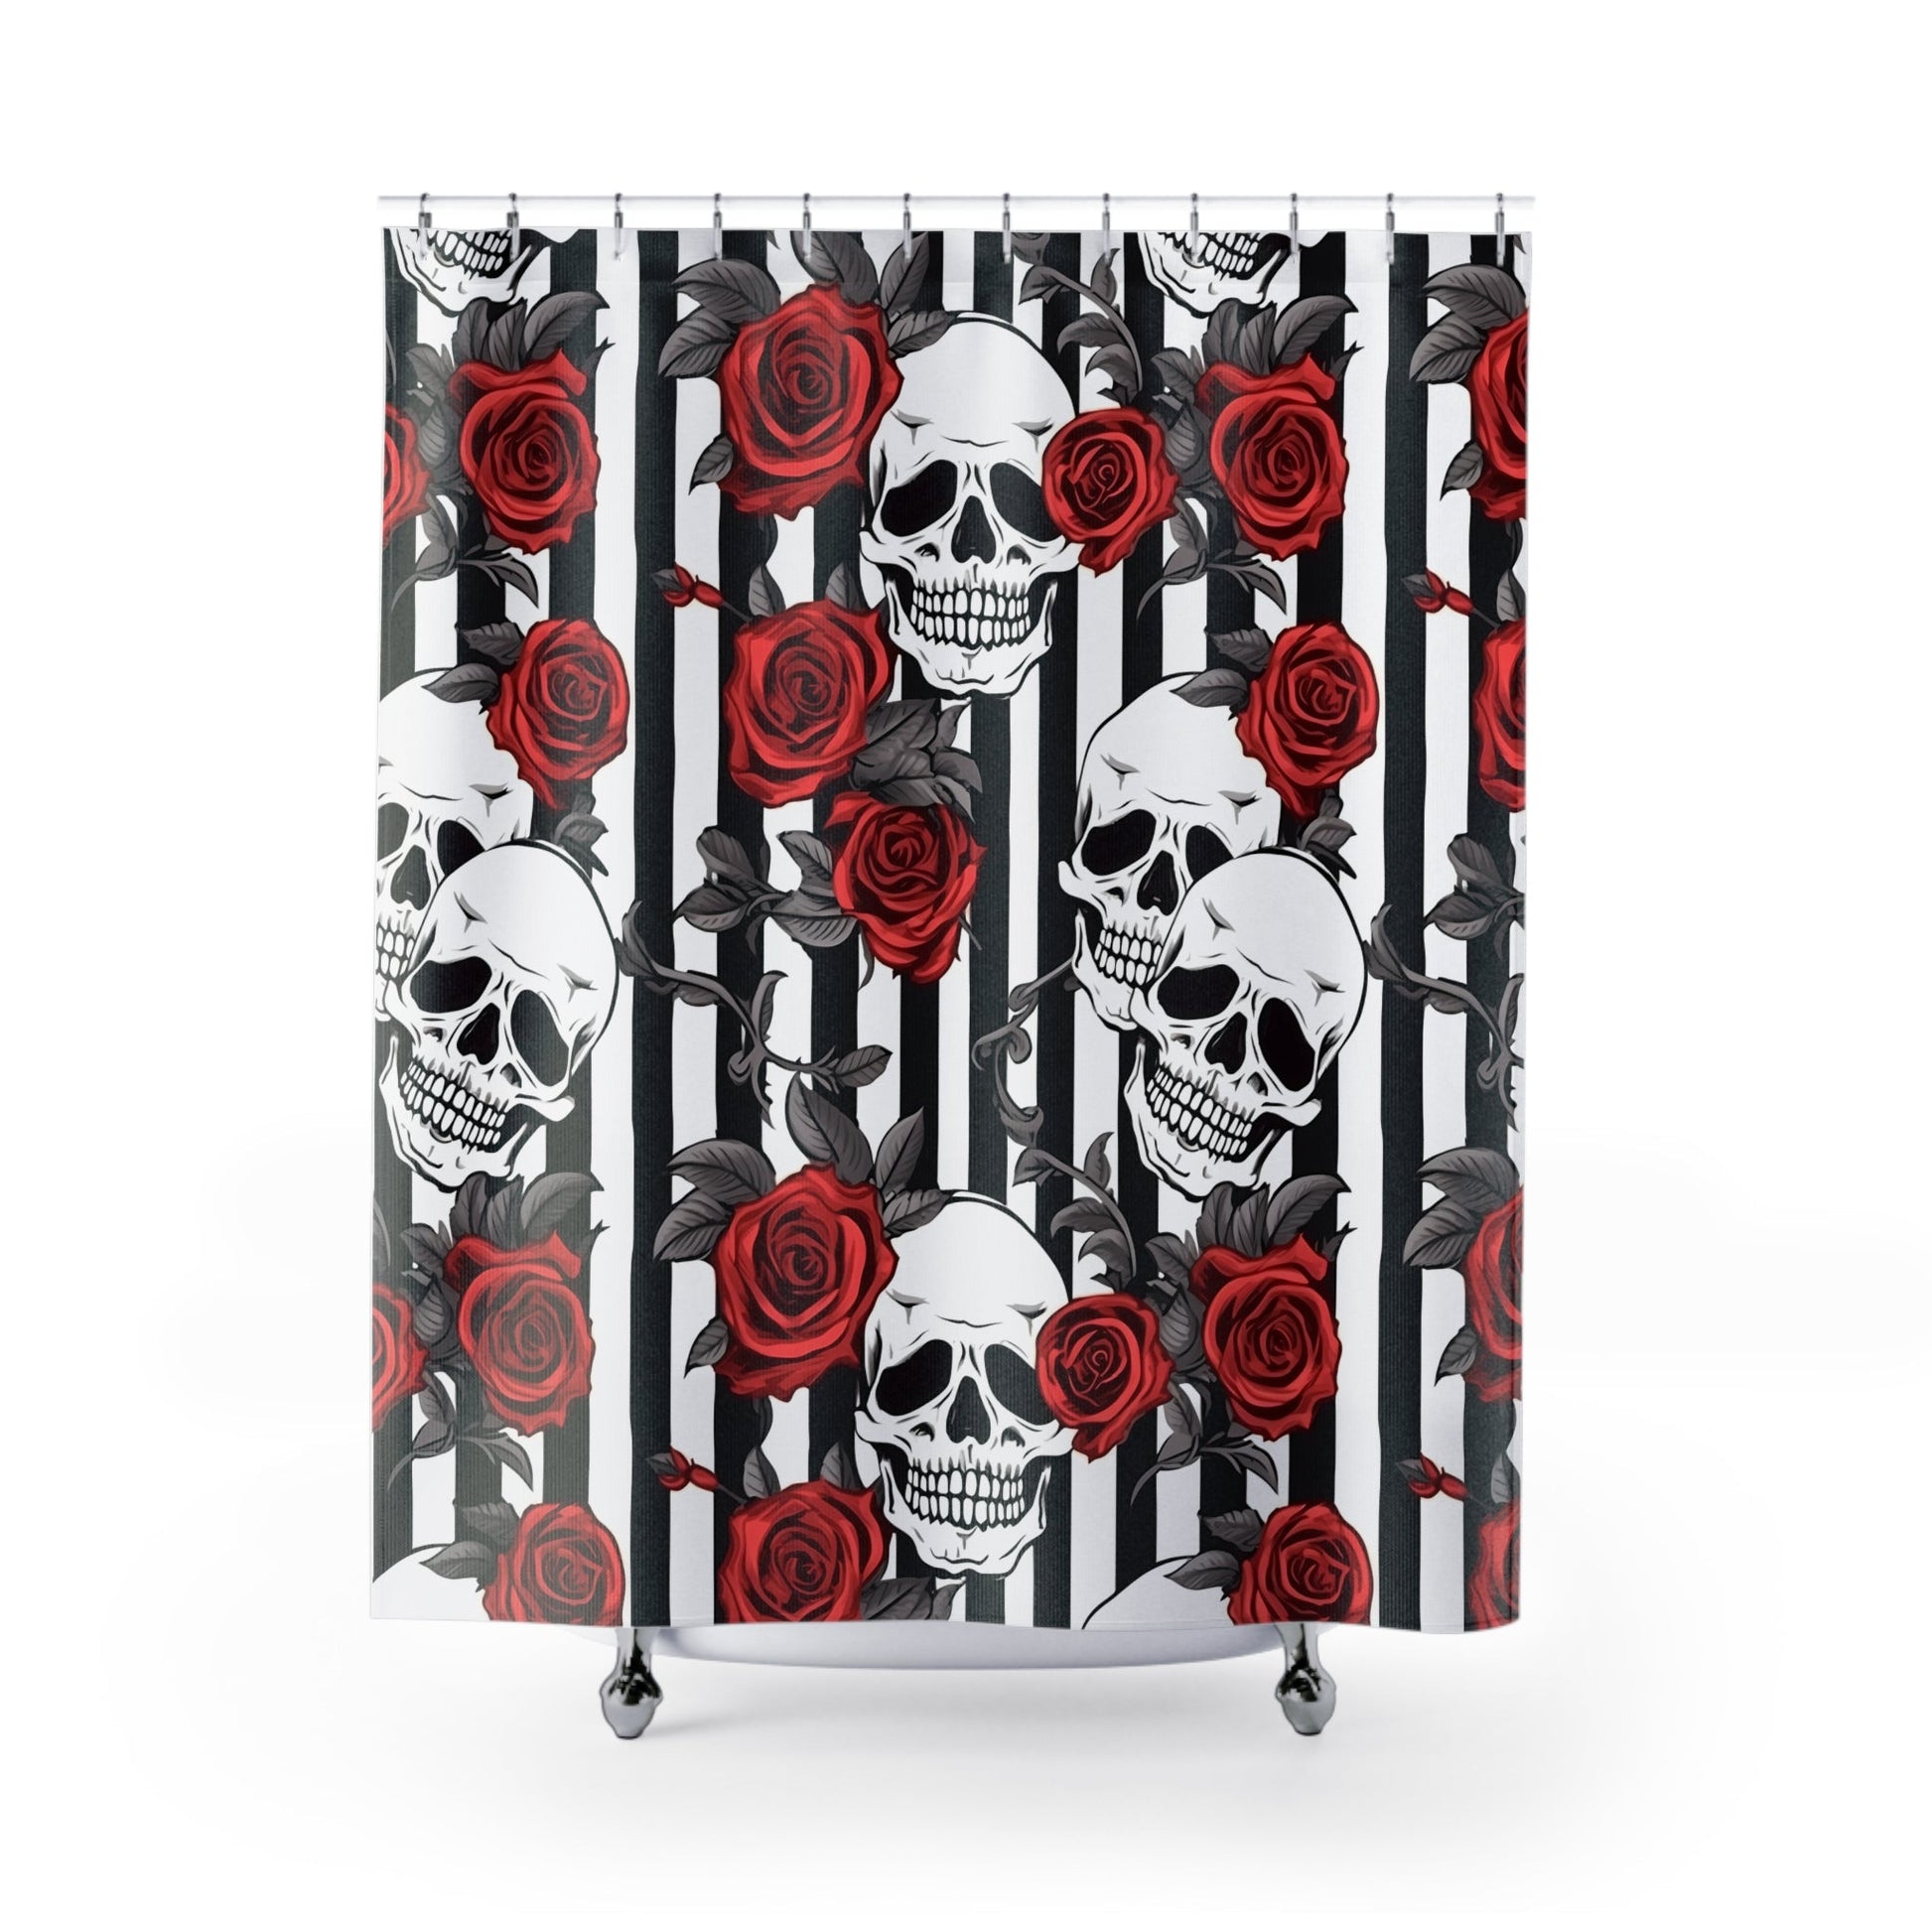 Black White Striped Red Roses and Skulls Shower CurtainHome DecorVTZdesigns71" × 74"BathBathroomgothic